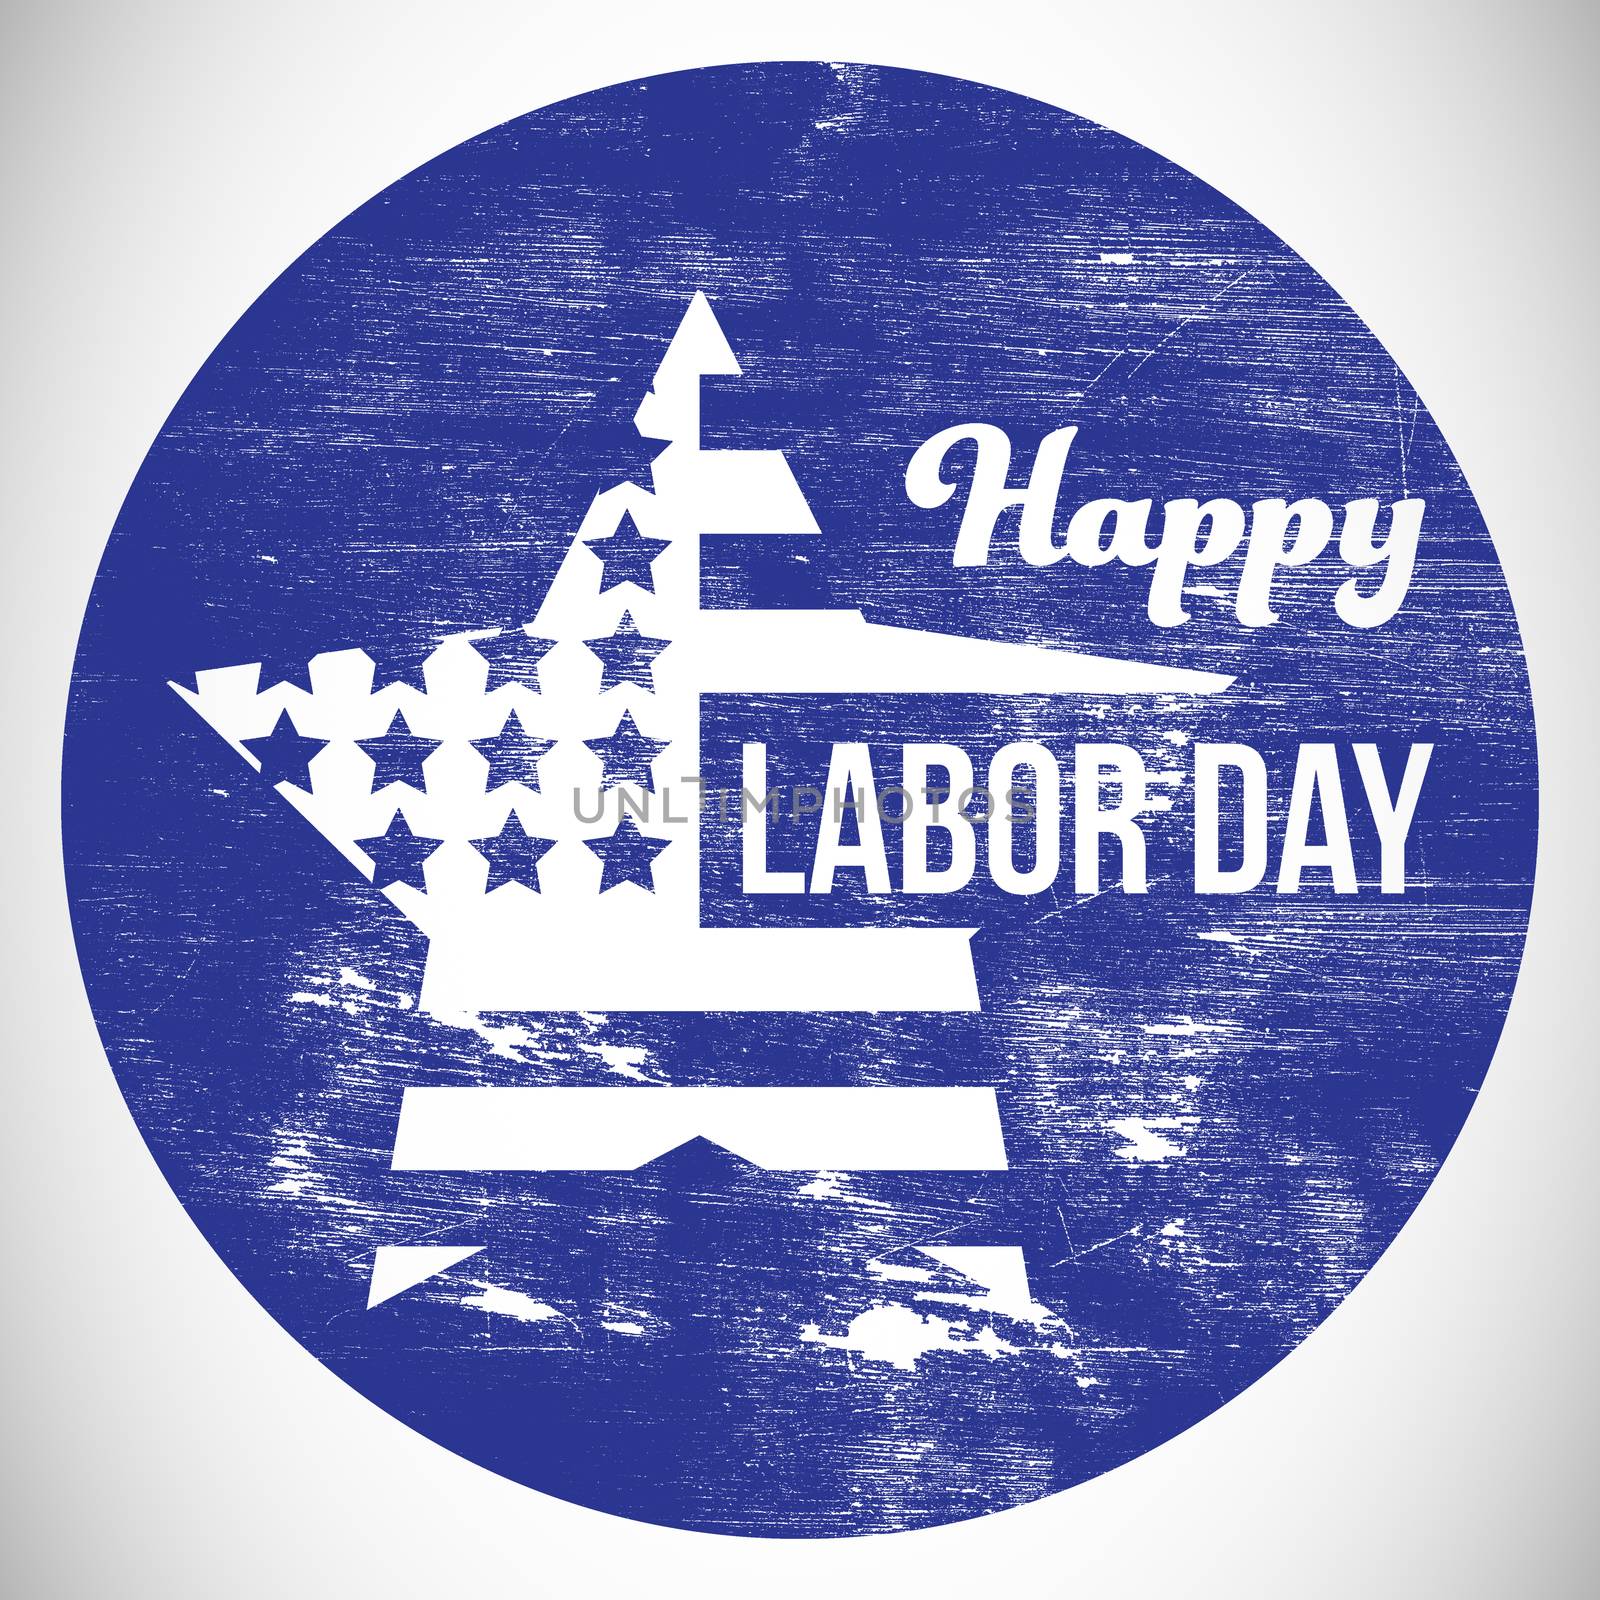 Digital composite image of happy labor day text on blue poster by Wavebreakmedia